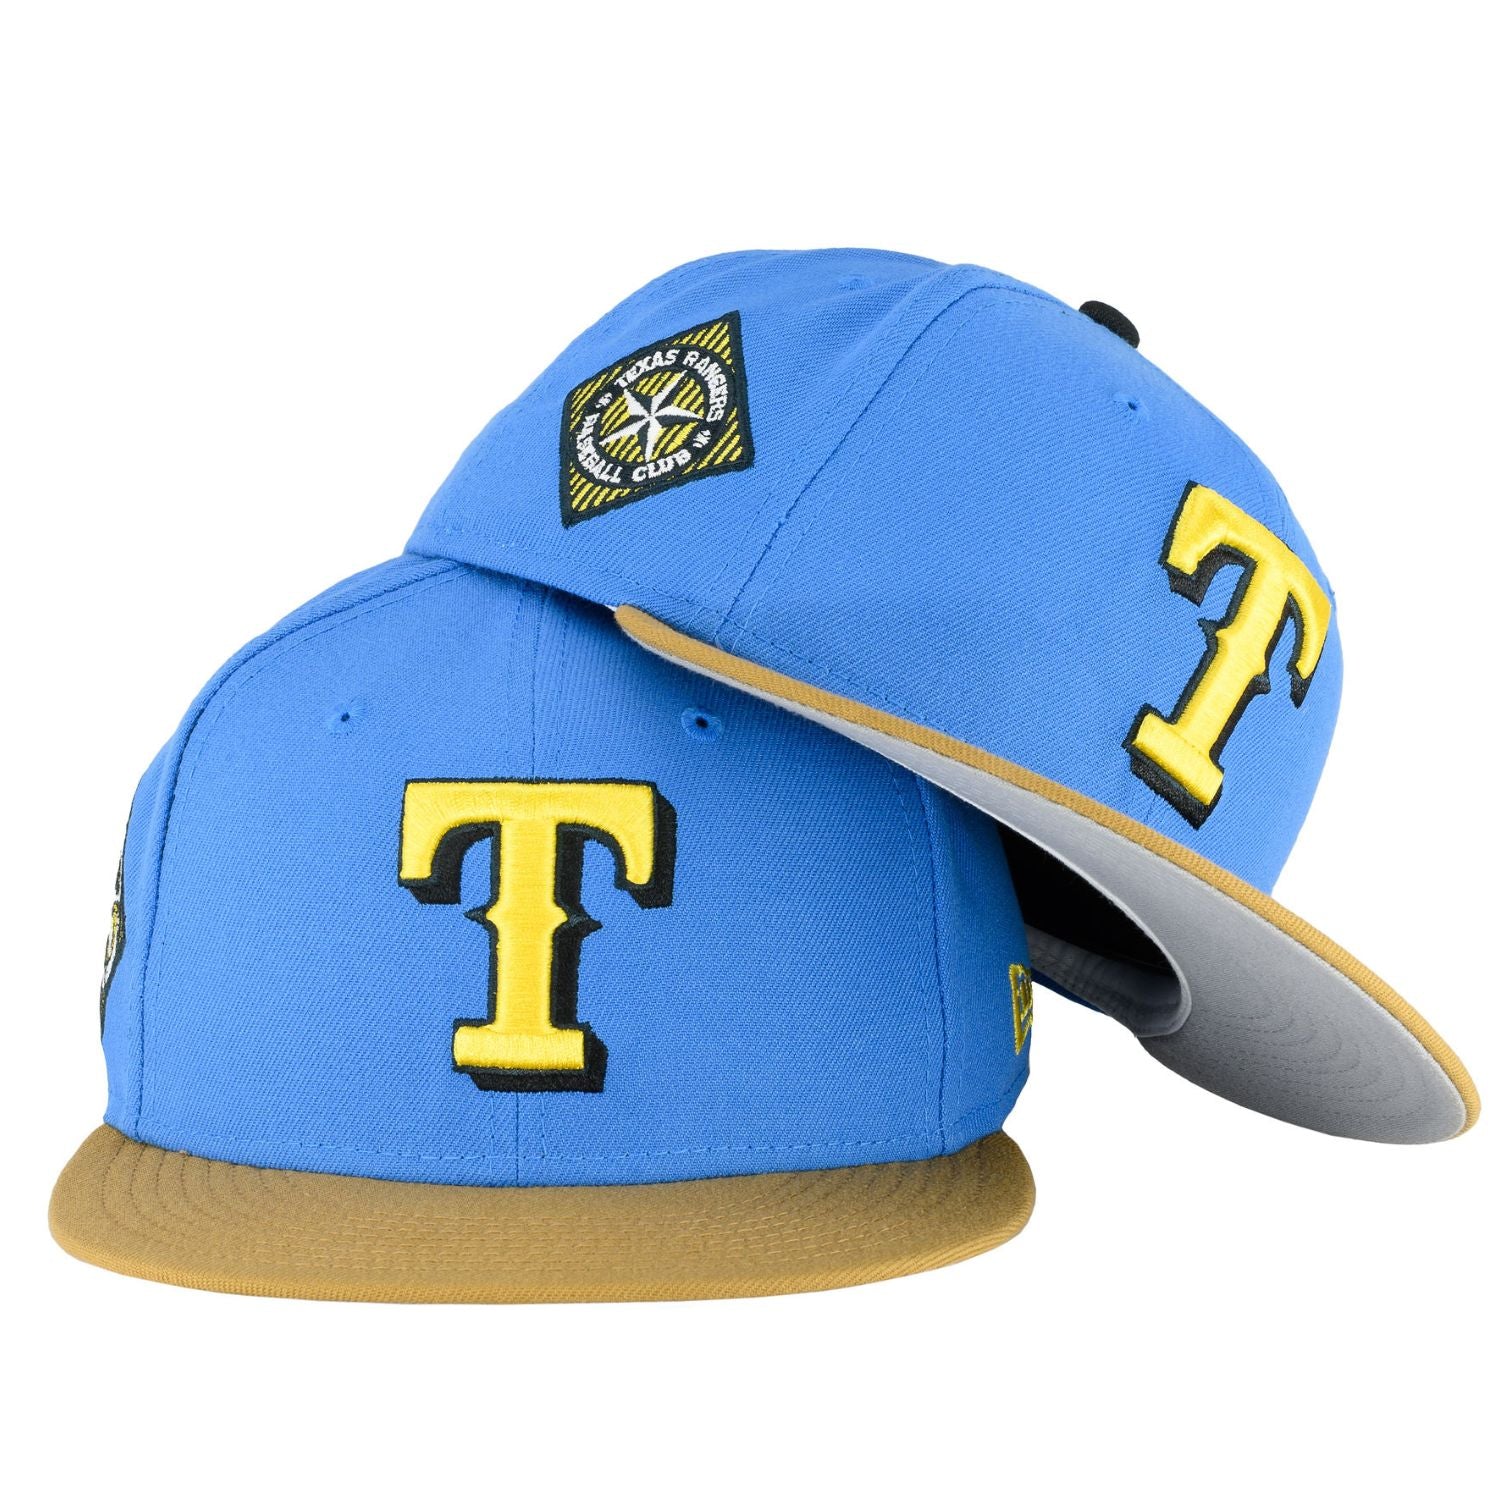 Texas Rangers New Era Dolphin 59FIFTY Fitted Hat - Gray/Blue